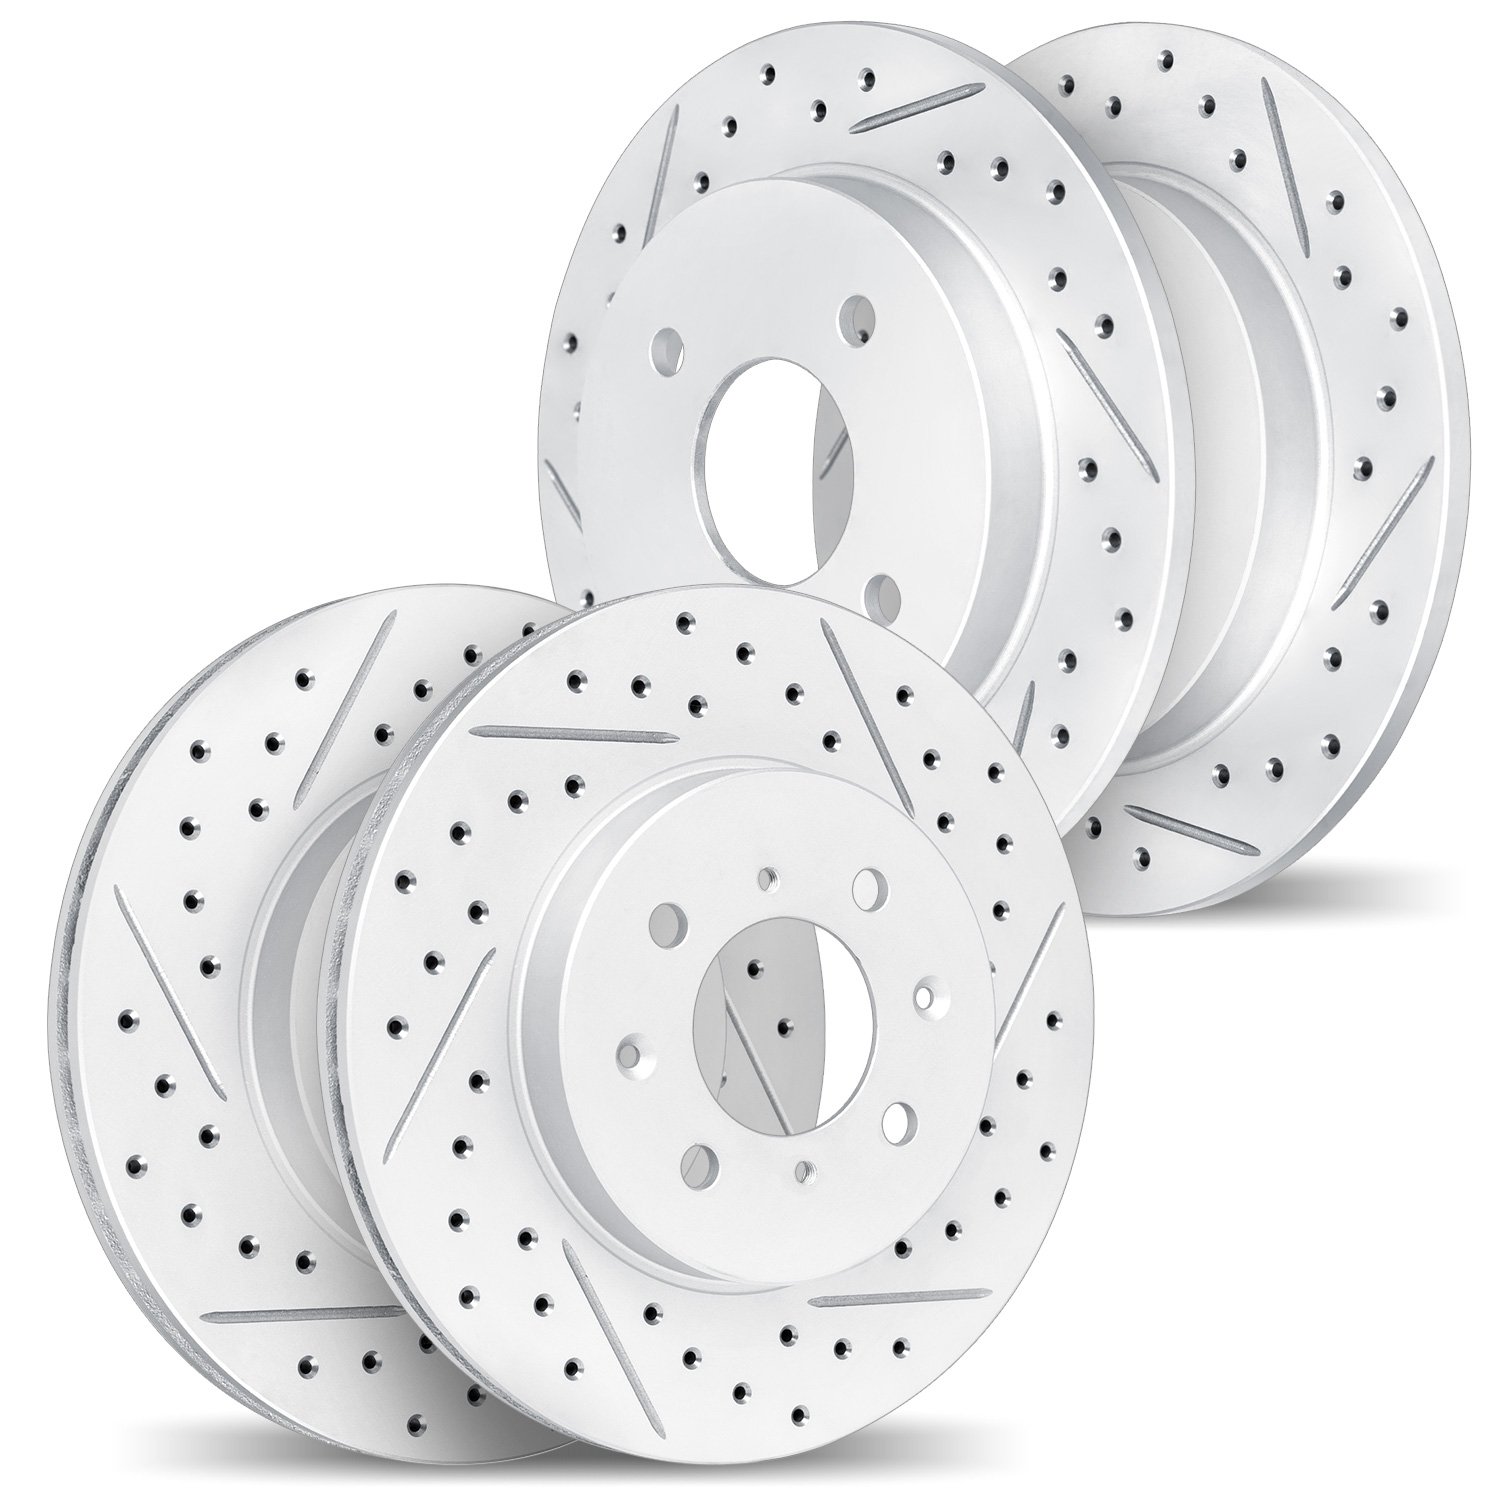 2004-80000 Geoperformance Drilled/Slotted Brake Rotors, Fits Select Multiple Makes/Models, Position: Front and Rear